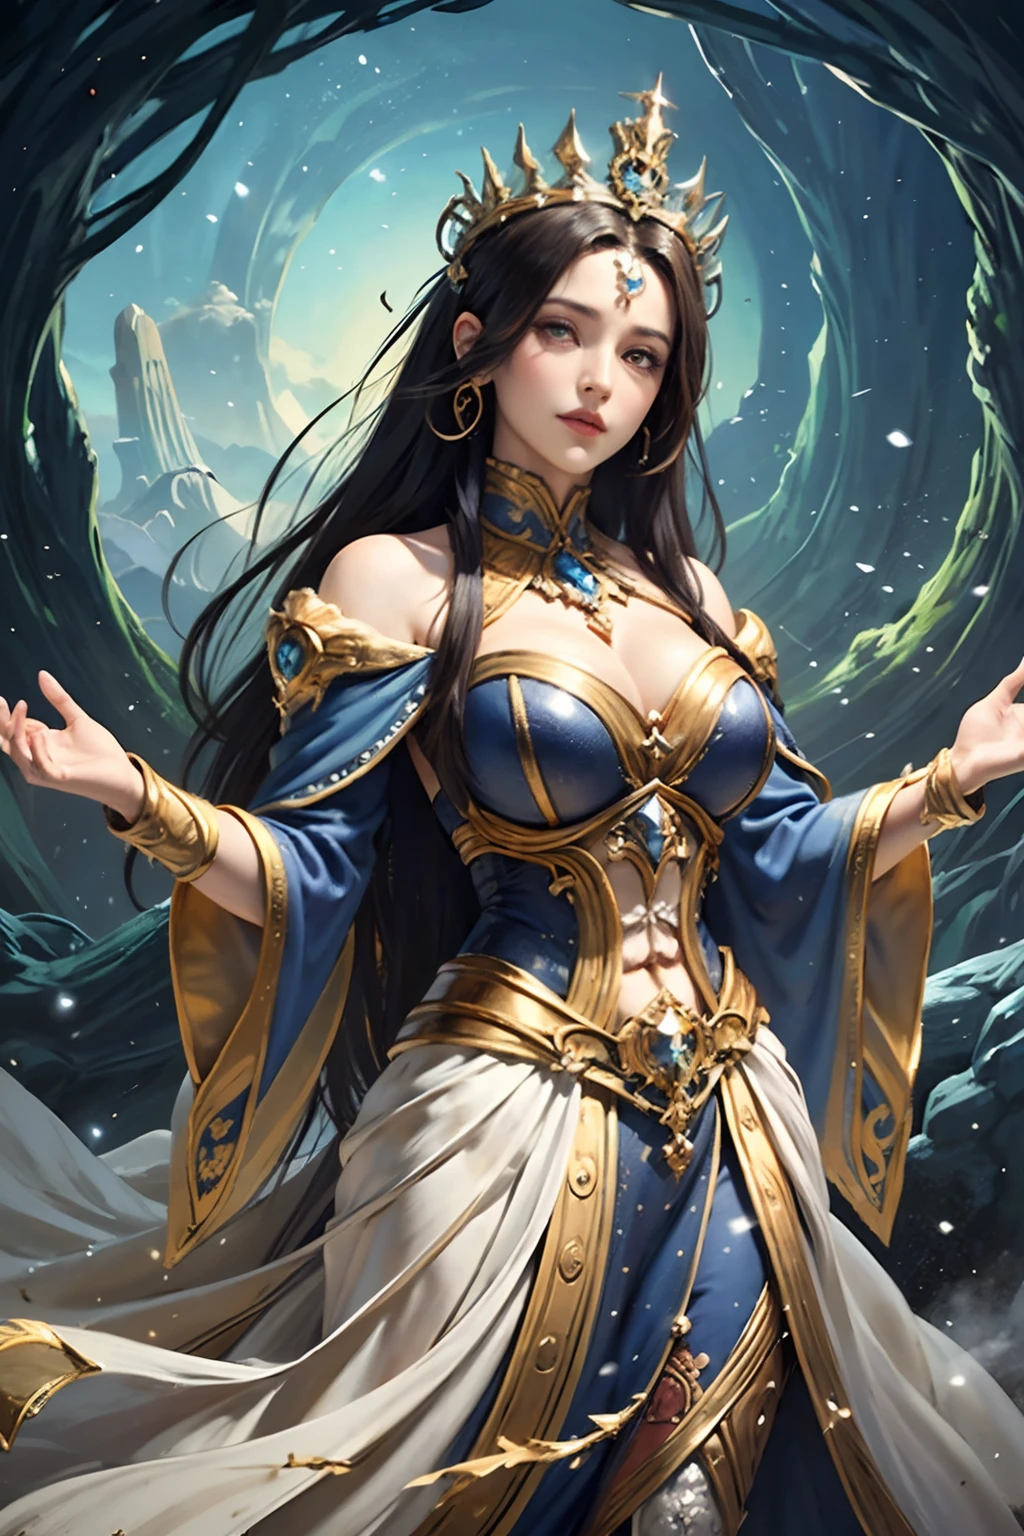 "(Masterpiece, Top Quality: 1.2), Official Art, Earth Goddess, Towering Over Mountains and Rivers, Holding the Planet Earth, Eyes (Deep Earthly Gaze: 1.3), Crown Adorned with Elements of Nature, (Gown of Majestic Landscapes: 1.4), (Immense Stature Amidst Earth's Beauty: 1.1), (Natural Background: 1.5), (Aura of Earthly Grandeur), Nature as Her Domain."